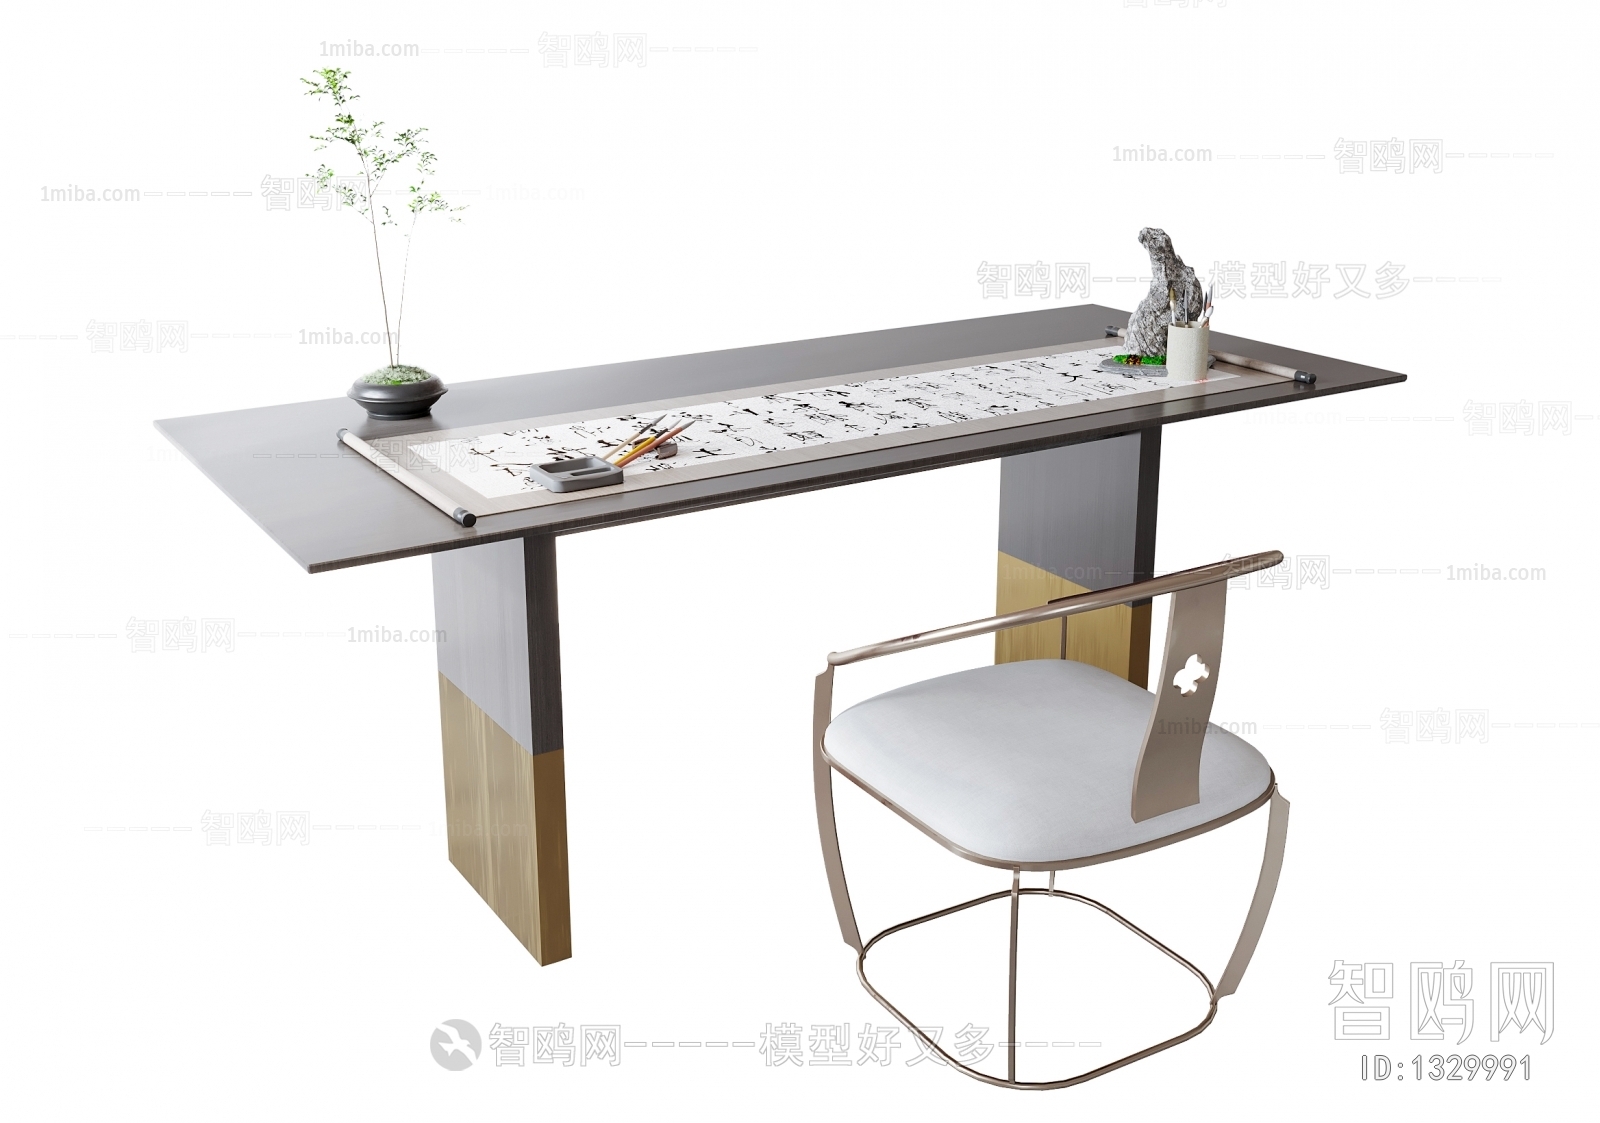 New Chinese Style Computer Desk And Chair